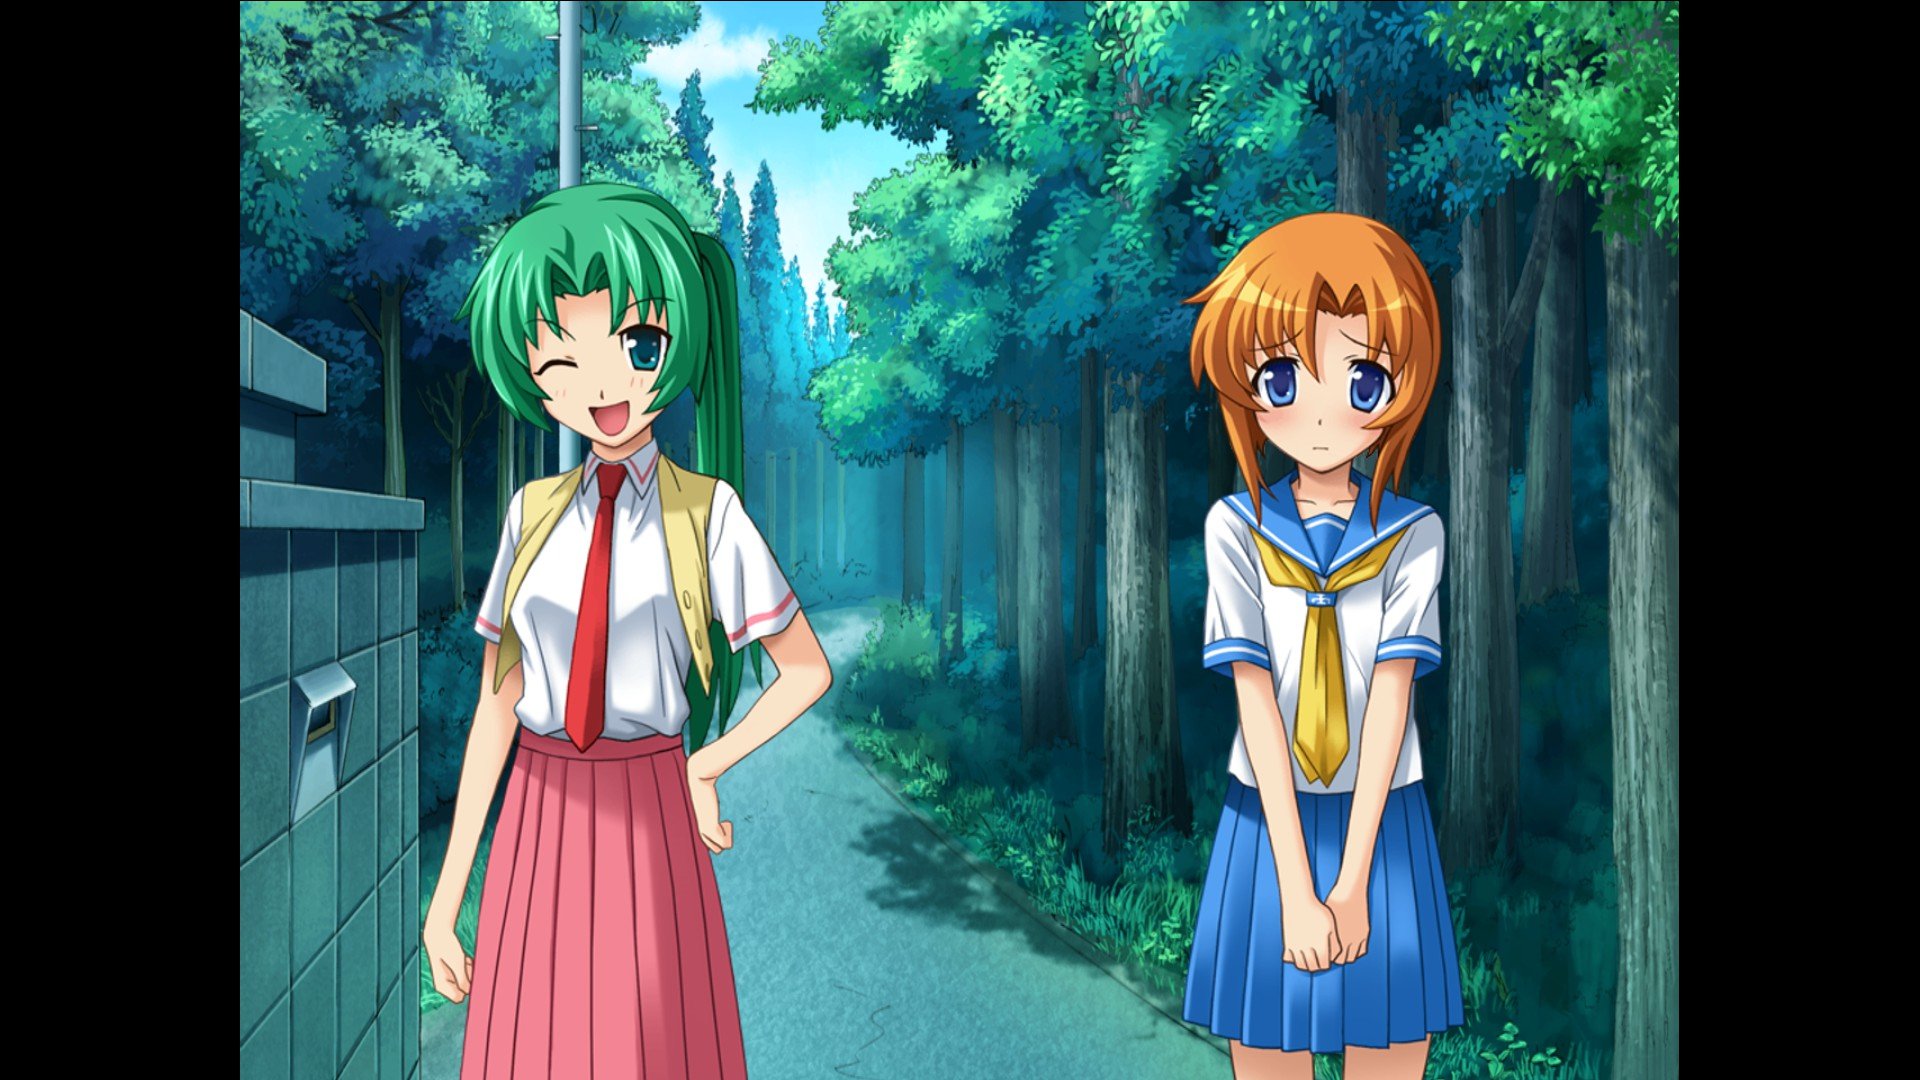 When they open a new. Рюгу Рена новелла. Рена Рюгу спрайты. Higurashi Рена новелла. Рена цикады.